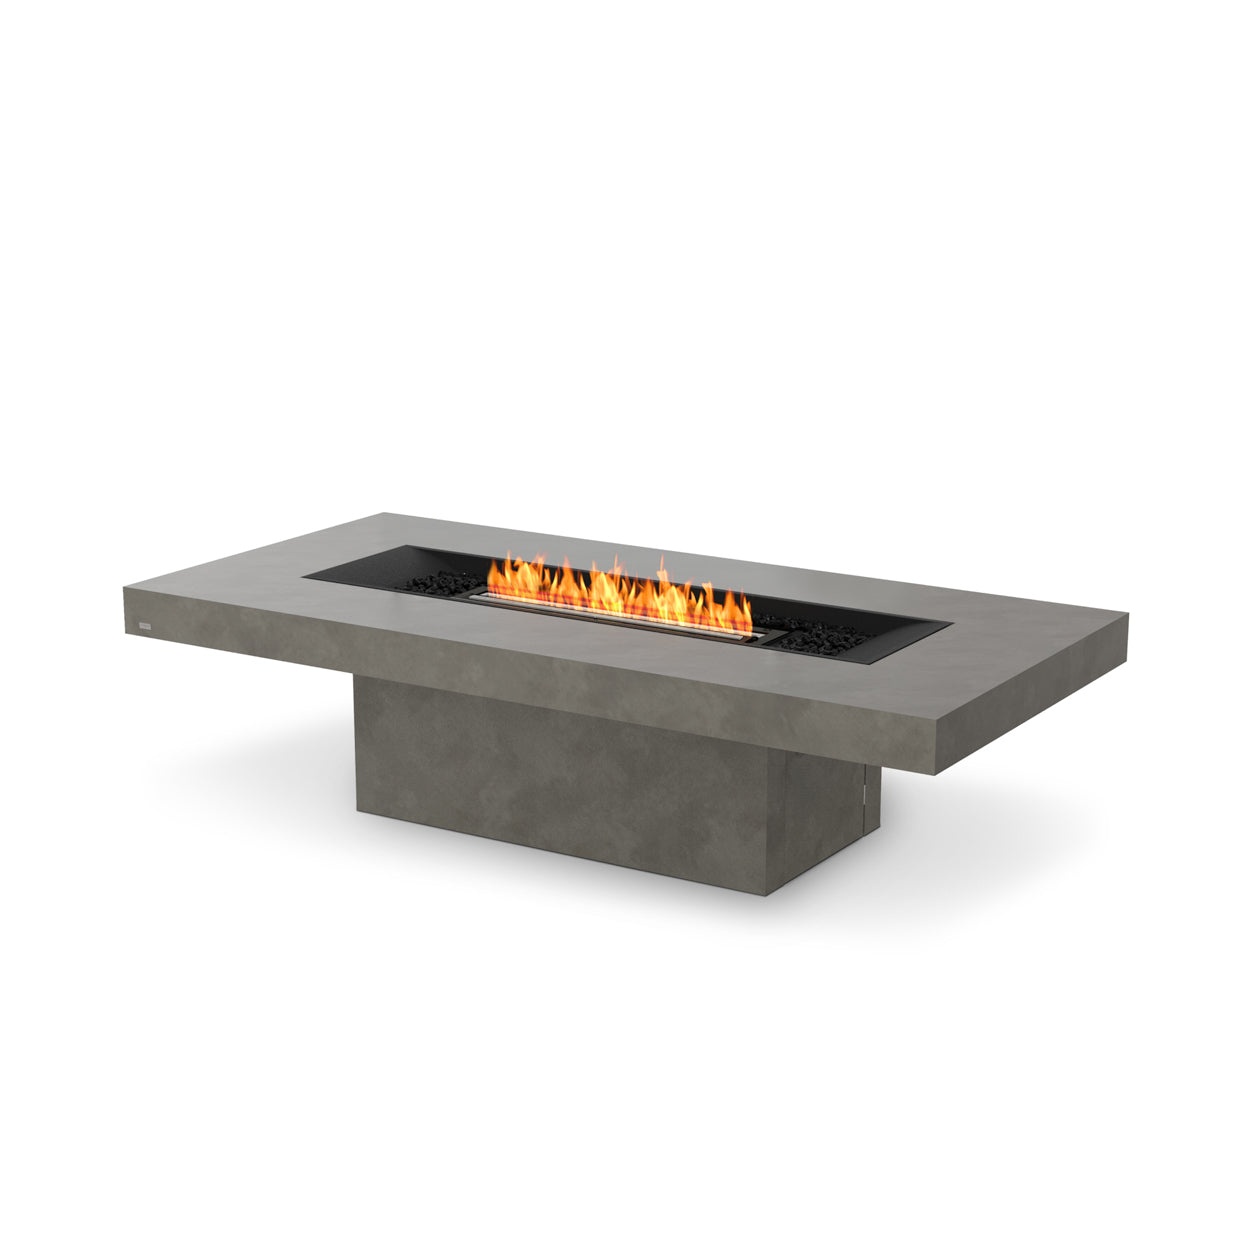 GIN 90 (CHAT) FIRE PIT TABLE - ETHANOL